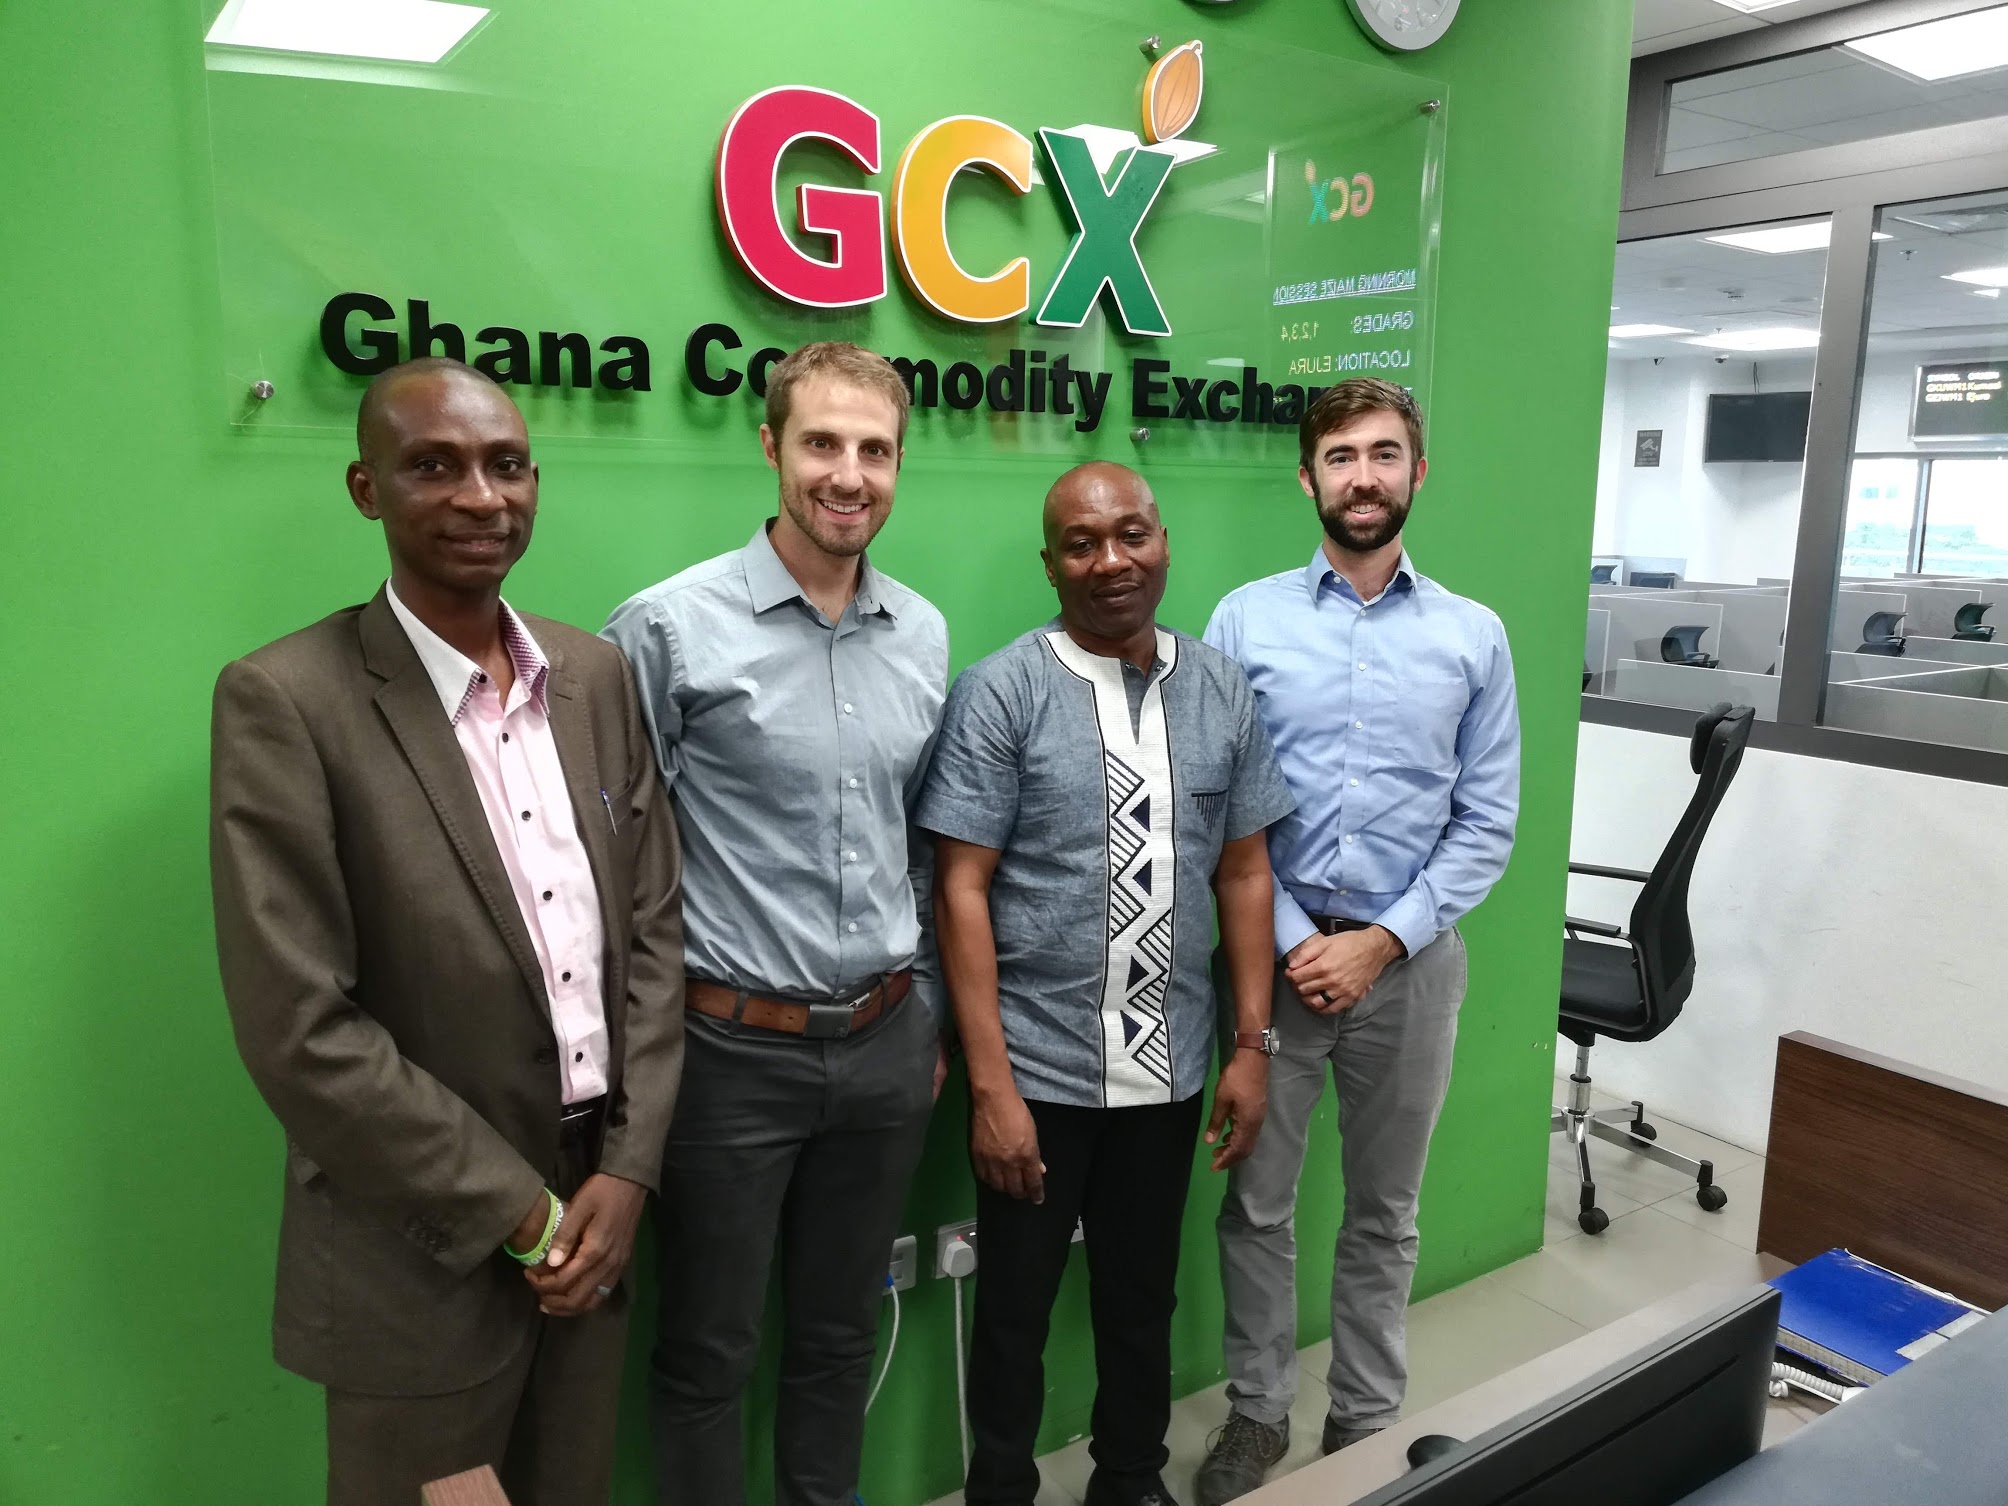 Dr. Gallenstein at Ghana Commodity Exchange